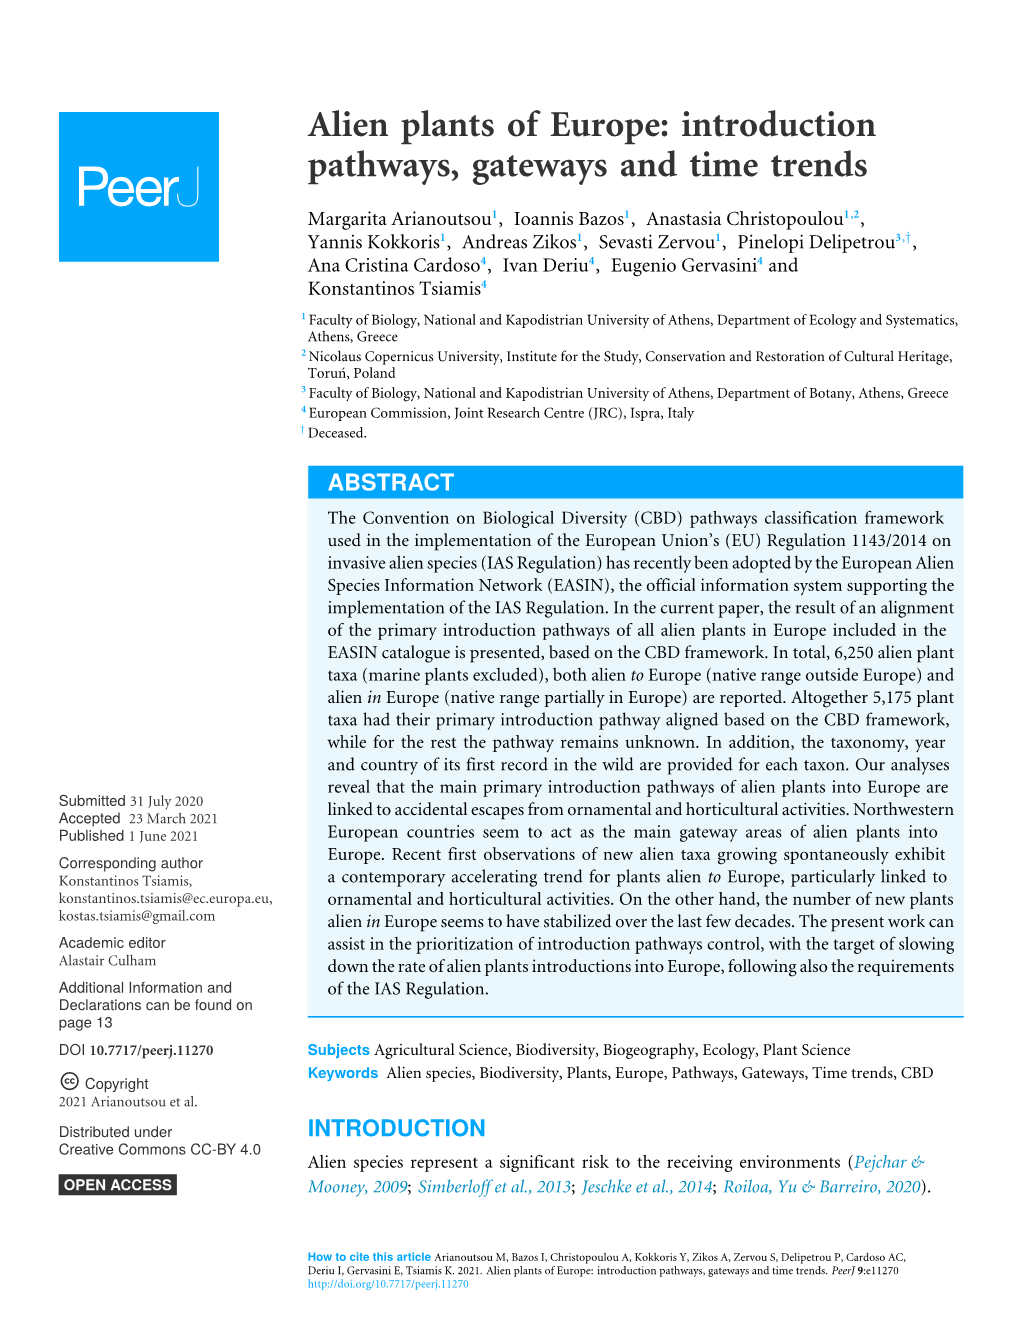 Alien Plants of Europe: Introduction Pathways, Gateways and Time Trends